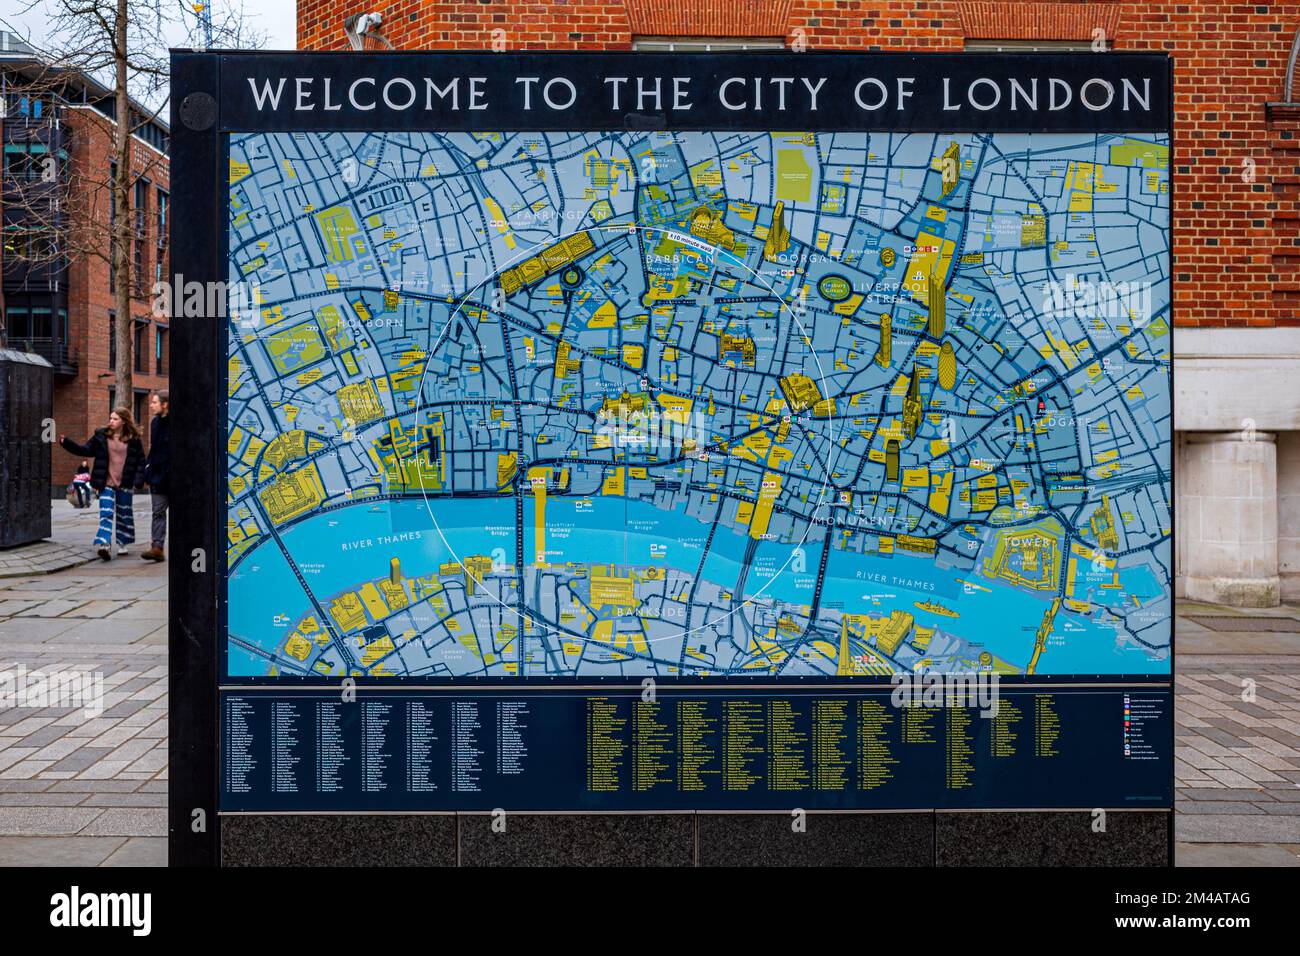 City of London Street Map. Street Map of the City of London Financial District. City of London Tourist Map. City of London Tourism Map. Stock Photo